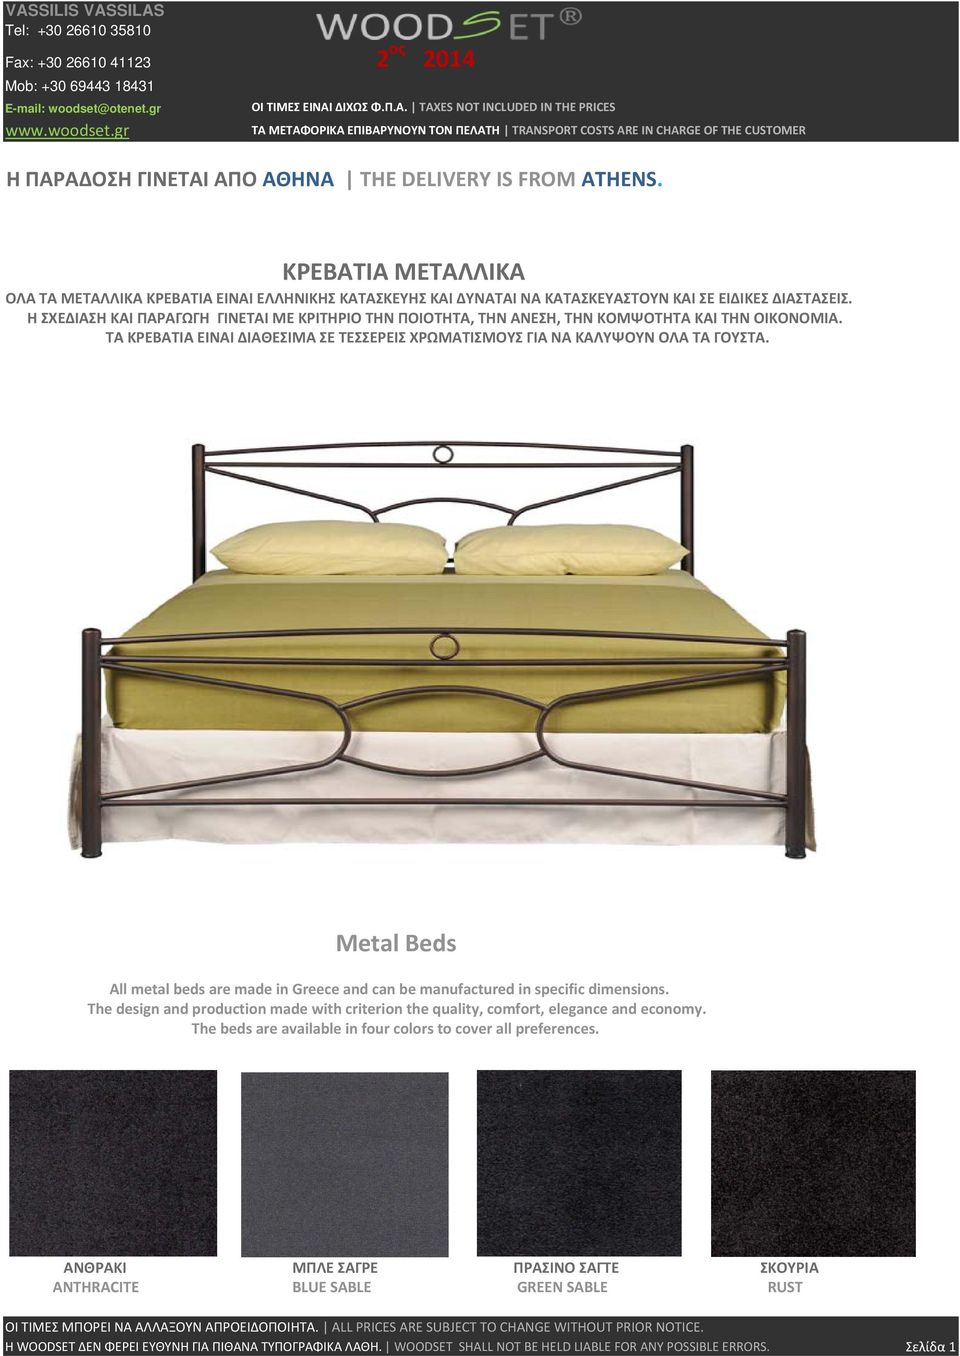 Metal Beds All metal beds are made in Greece and can be manufactured in specific dimensions. The design and production made with criterion the quality, comfort, elegance and economy.